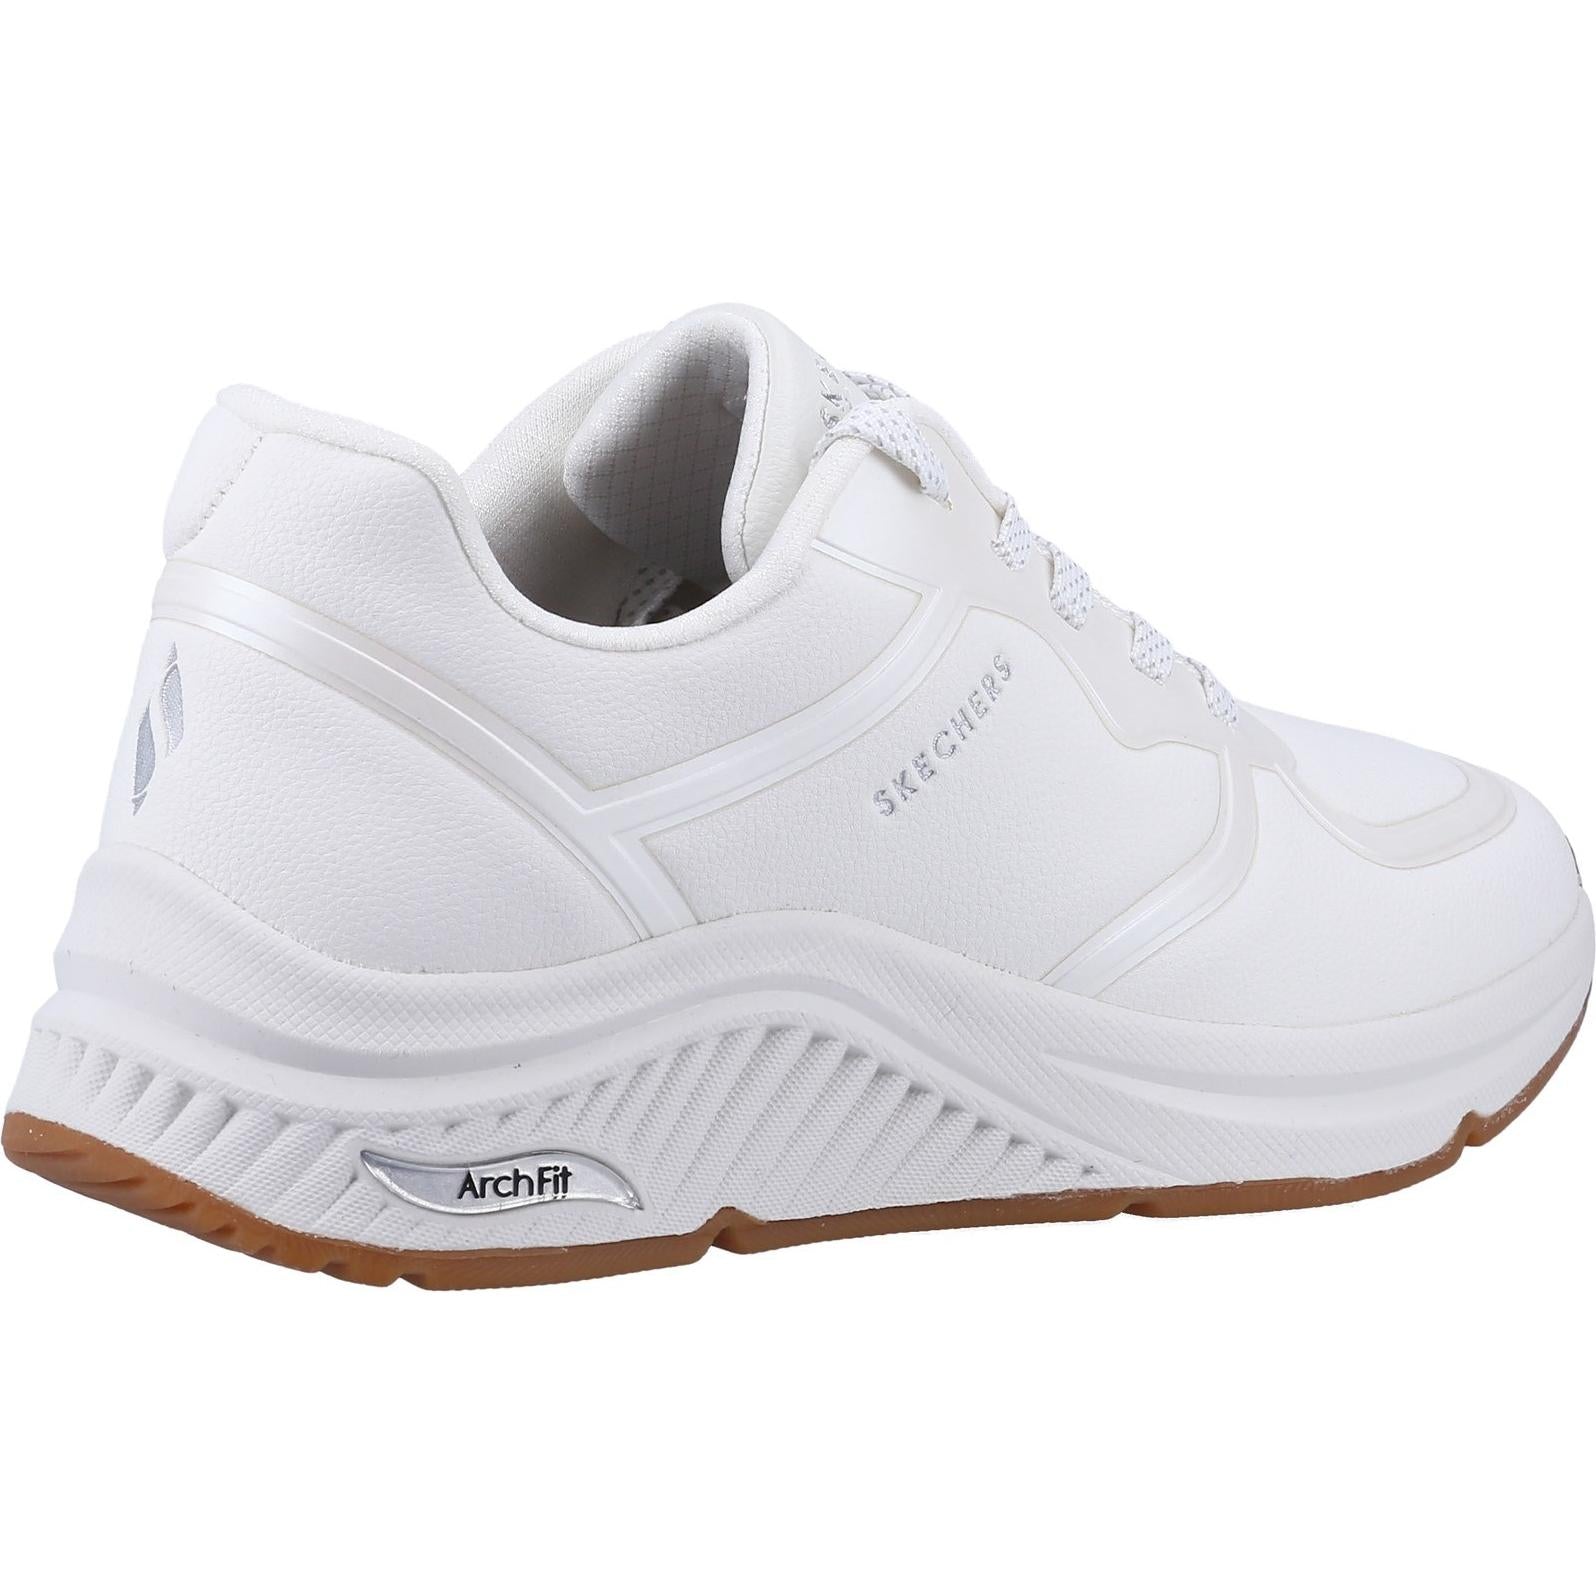 Skechers Arch Fit S-Miles Mile Makers Trainers